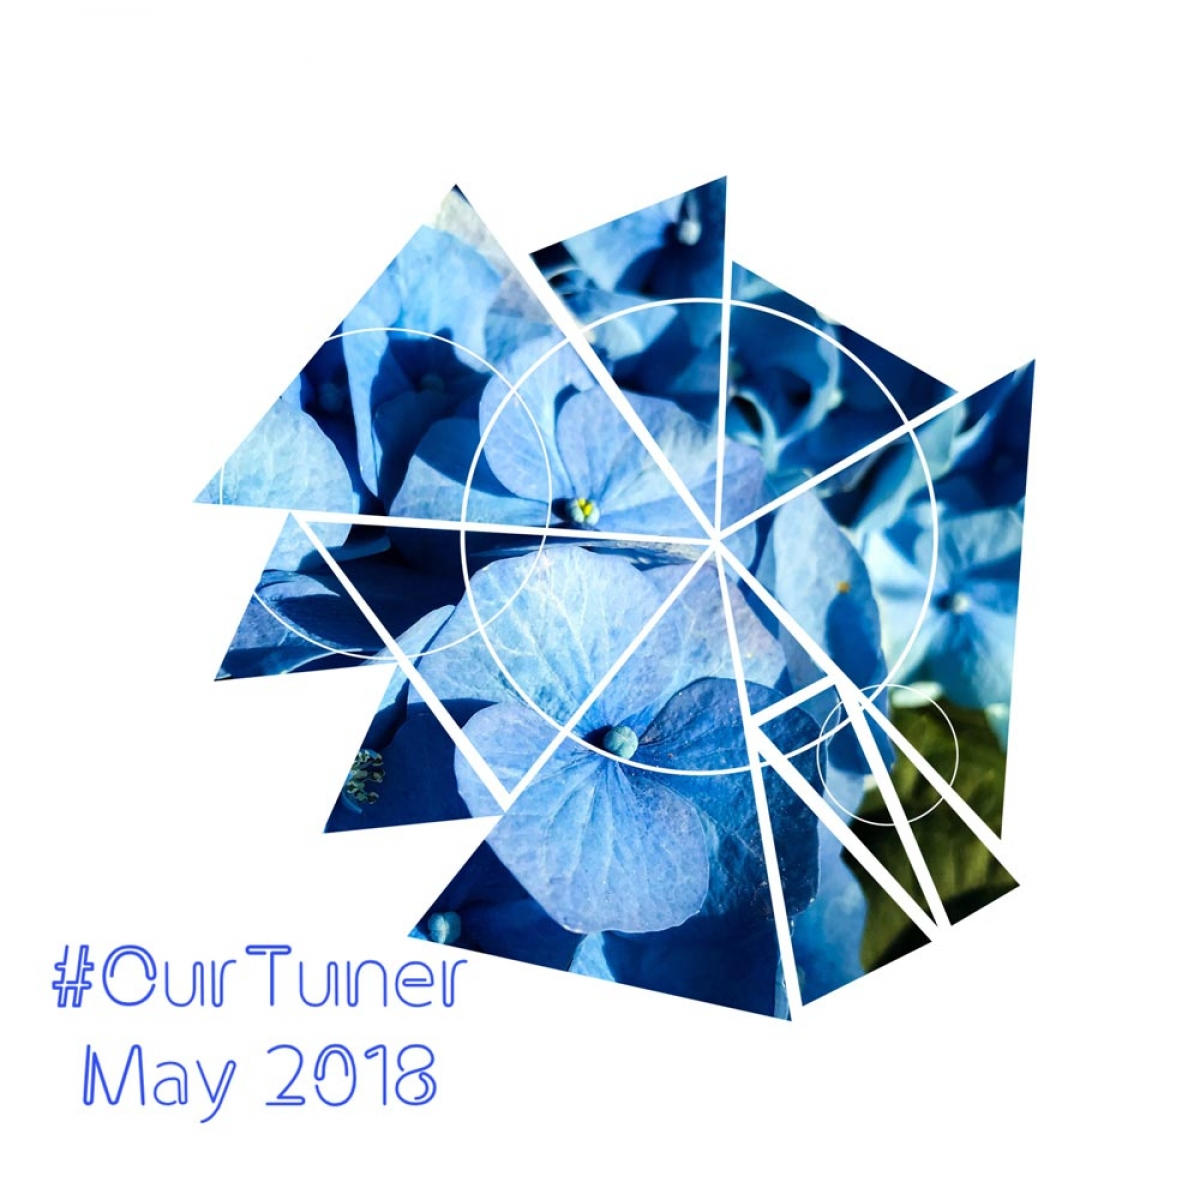 #Our TUNEr - May 2018